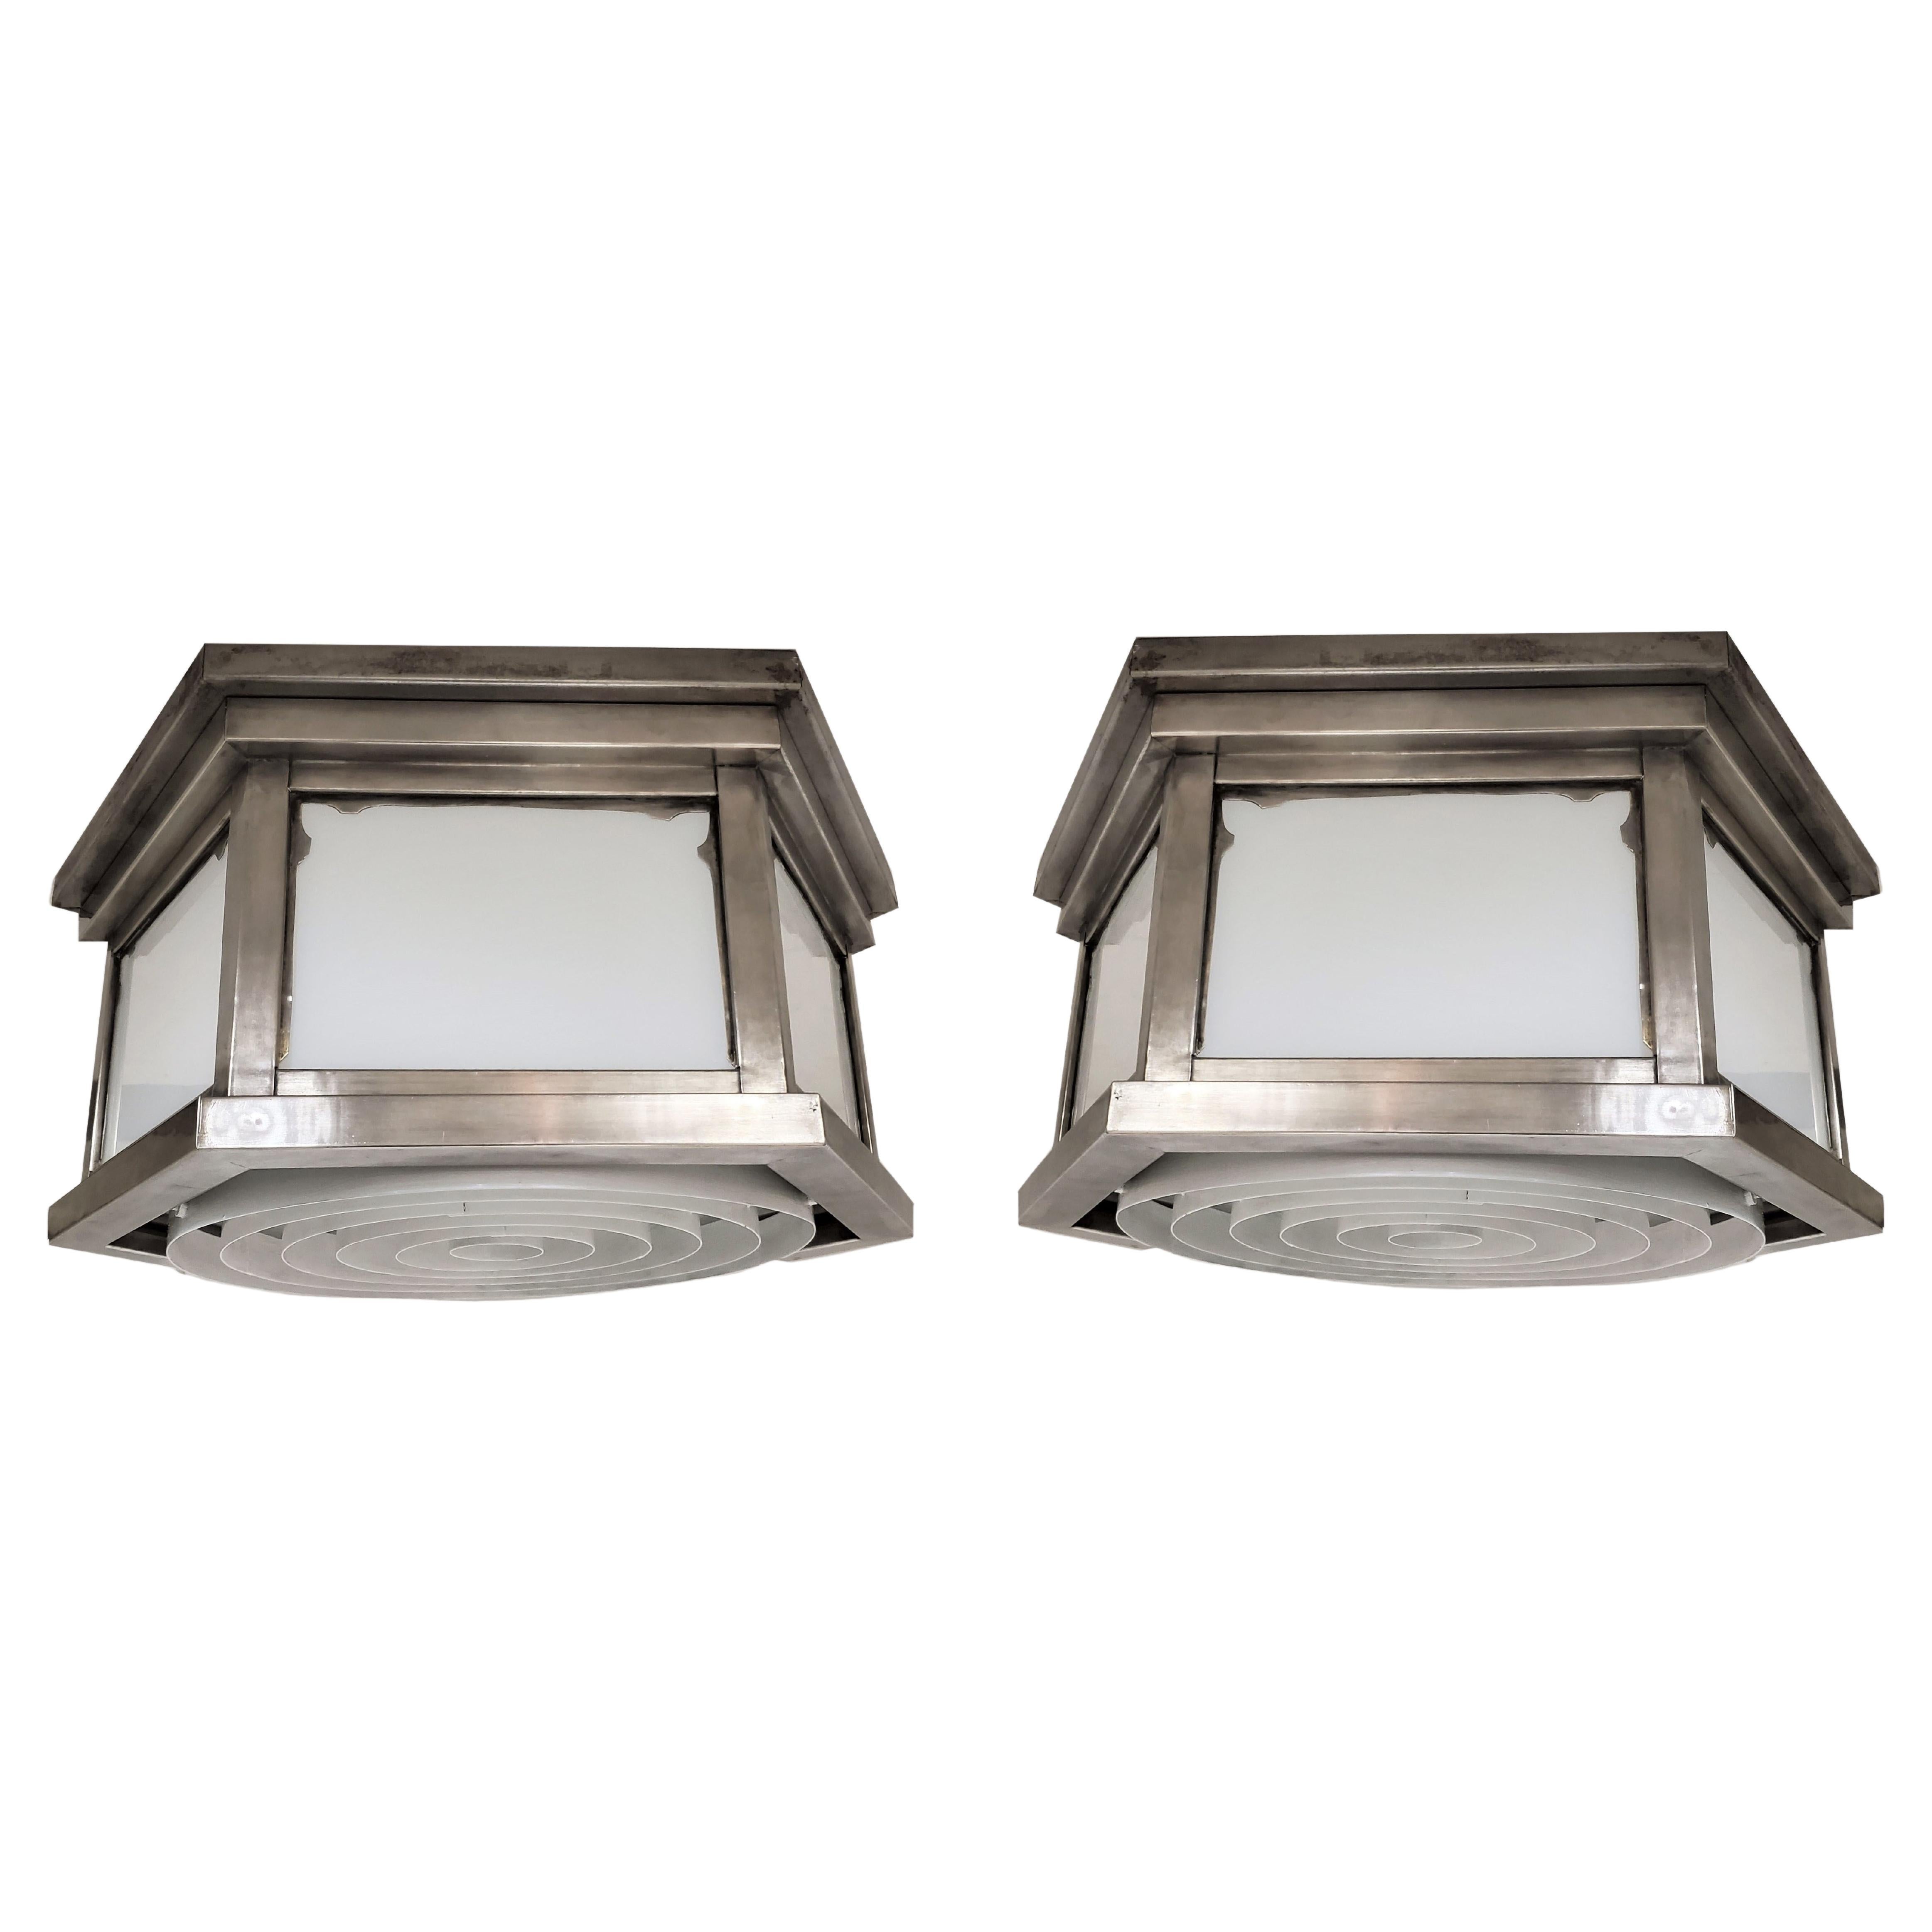 A pair of hexagonal Industrial white glass flush mounted fixtures with stepped designed frames in a warm satin nickel over brass. The six sided shape features opaque white glass panel insets and a concentric white painted, steel bottom surround.